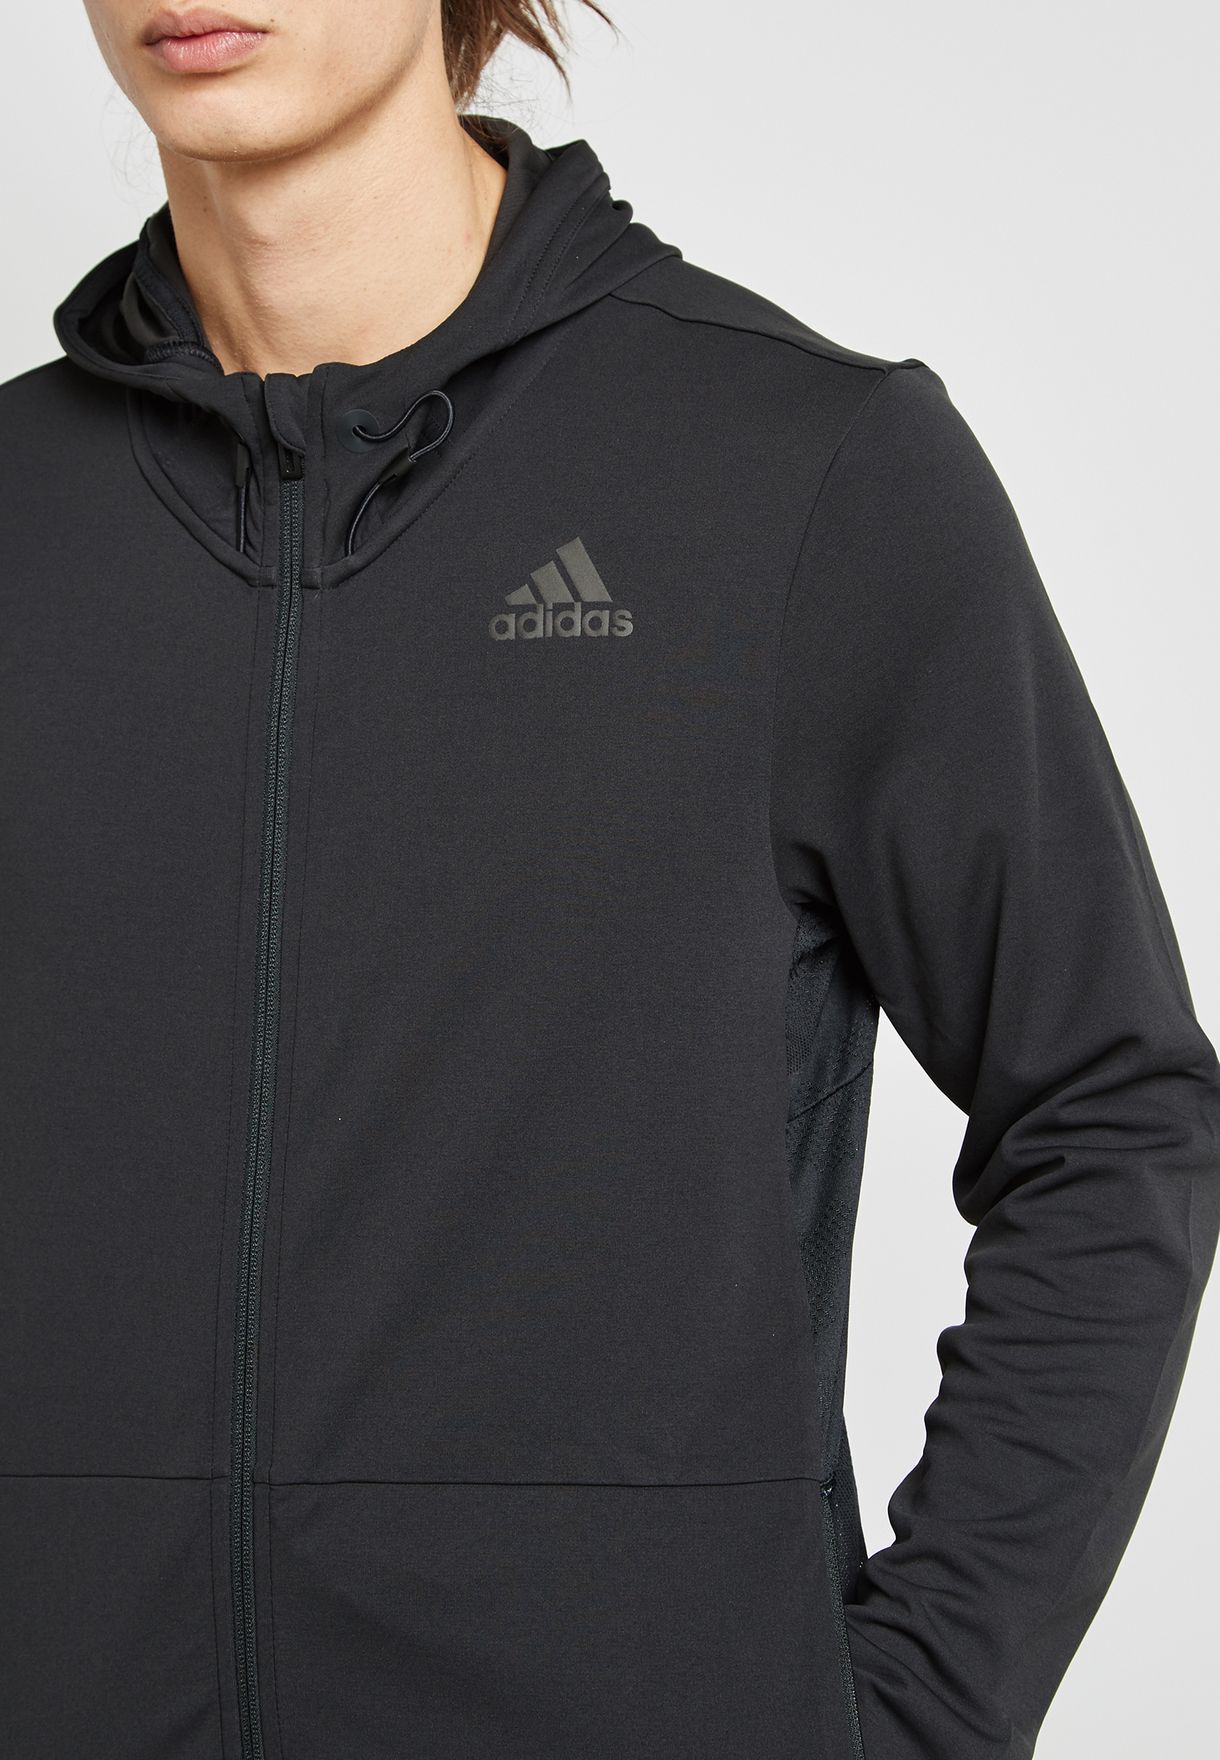 adidas climacool zip up sweater